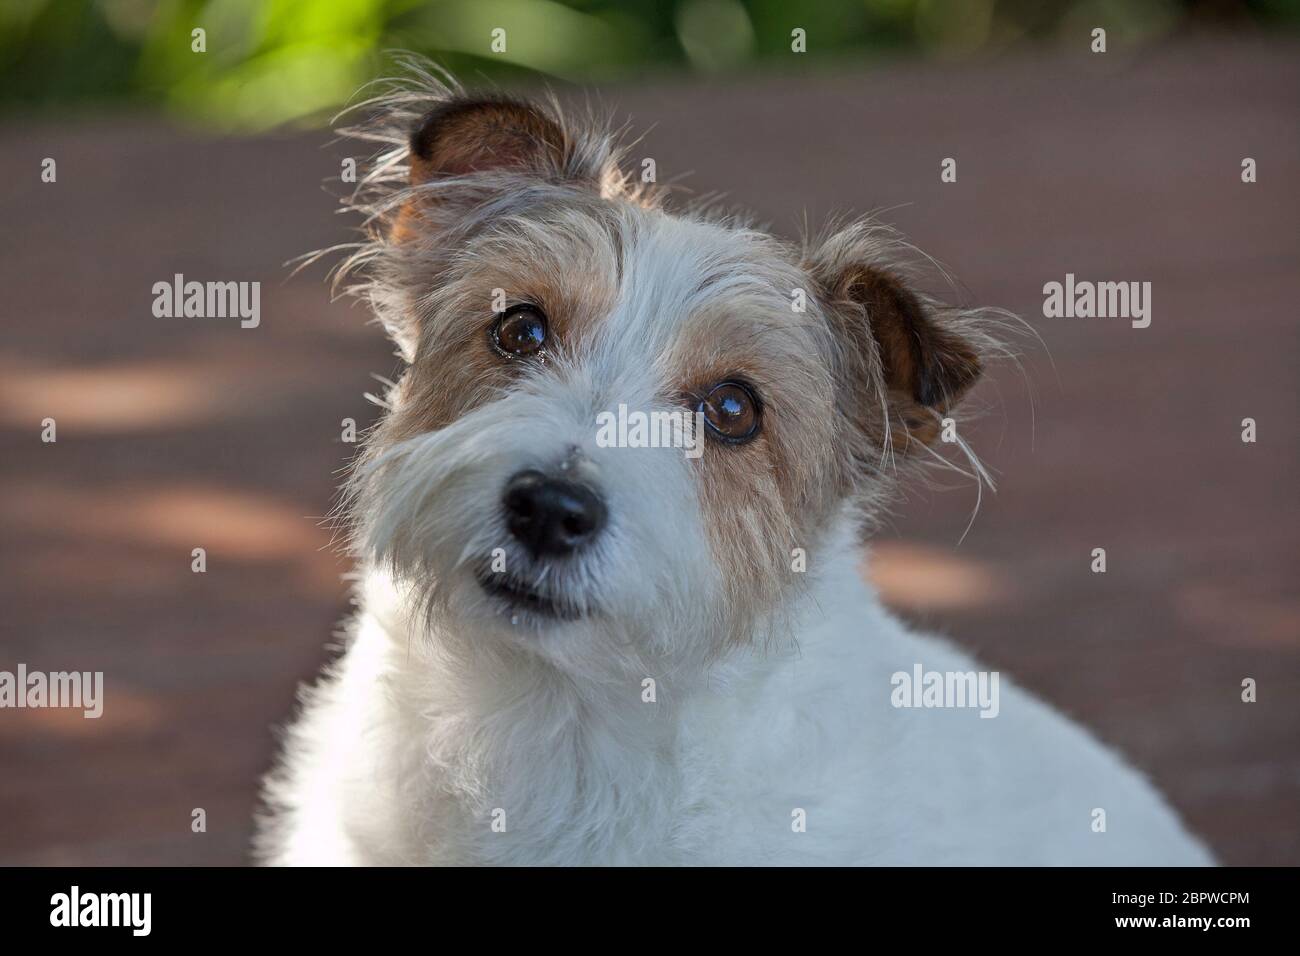 Short wire haired Jack Russell Terrier Stock Photo